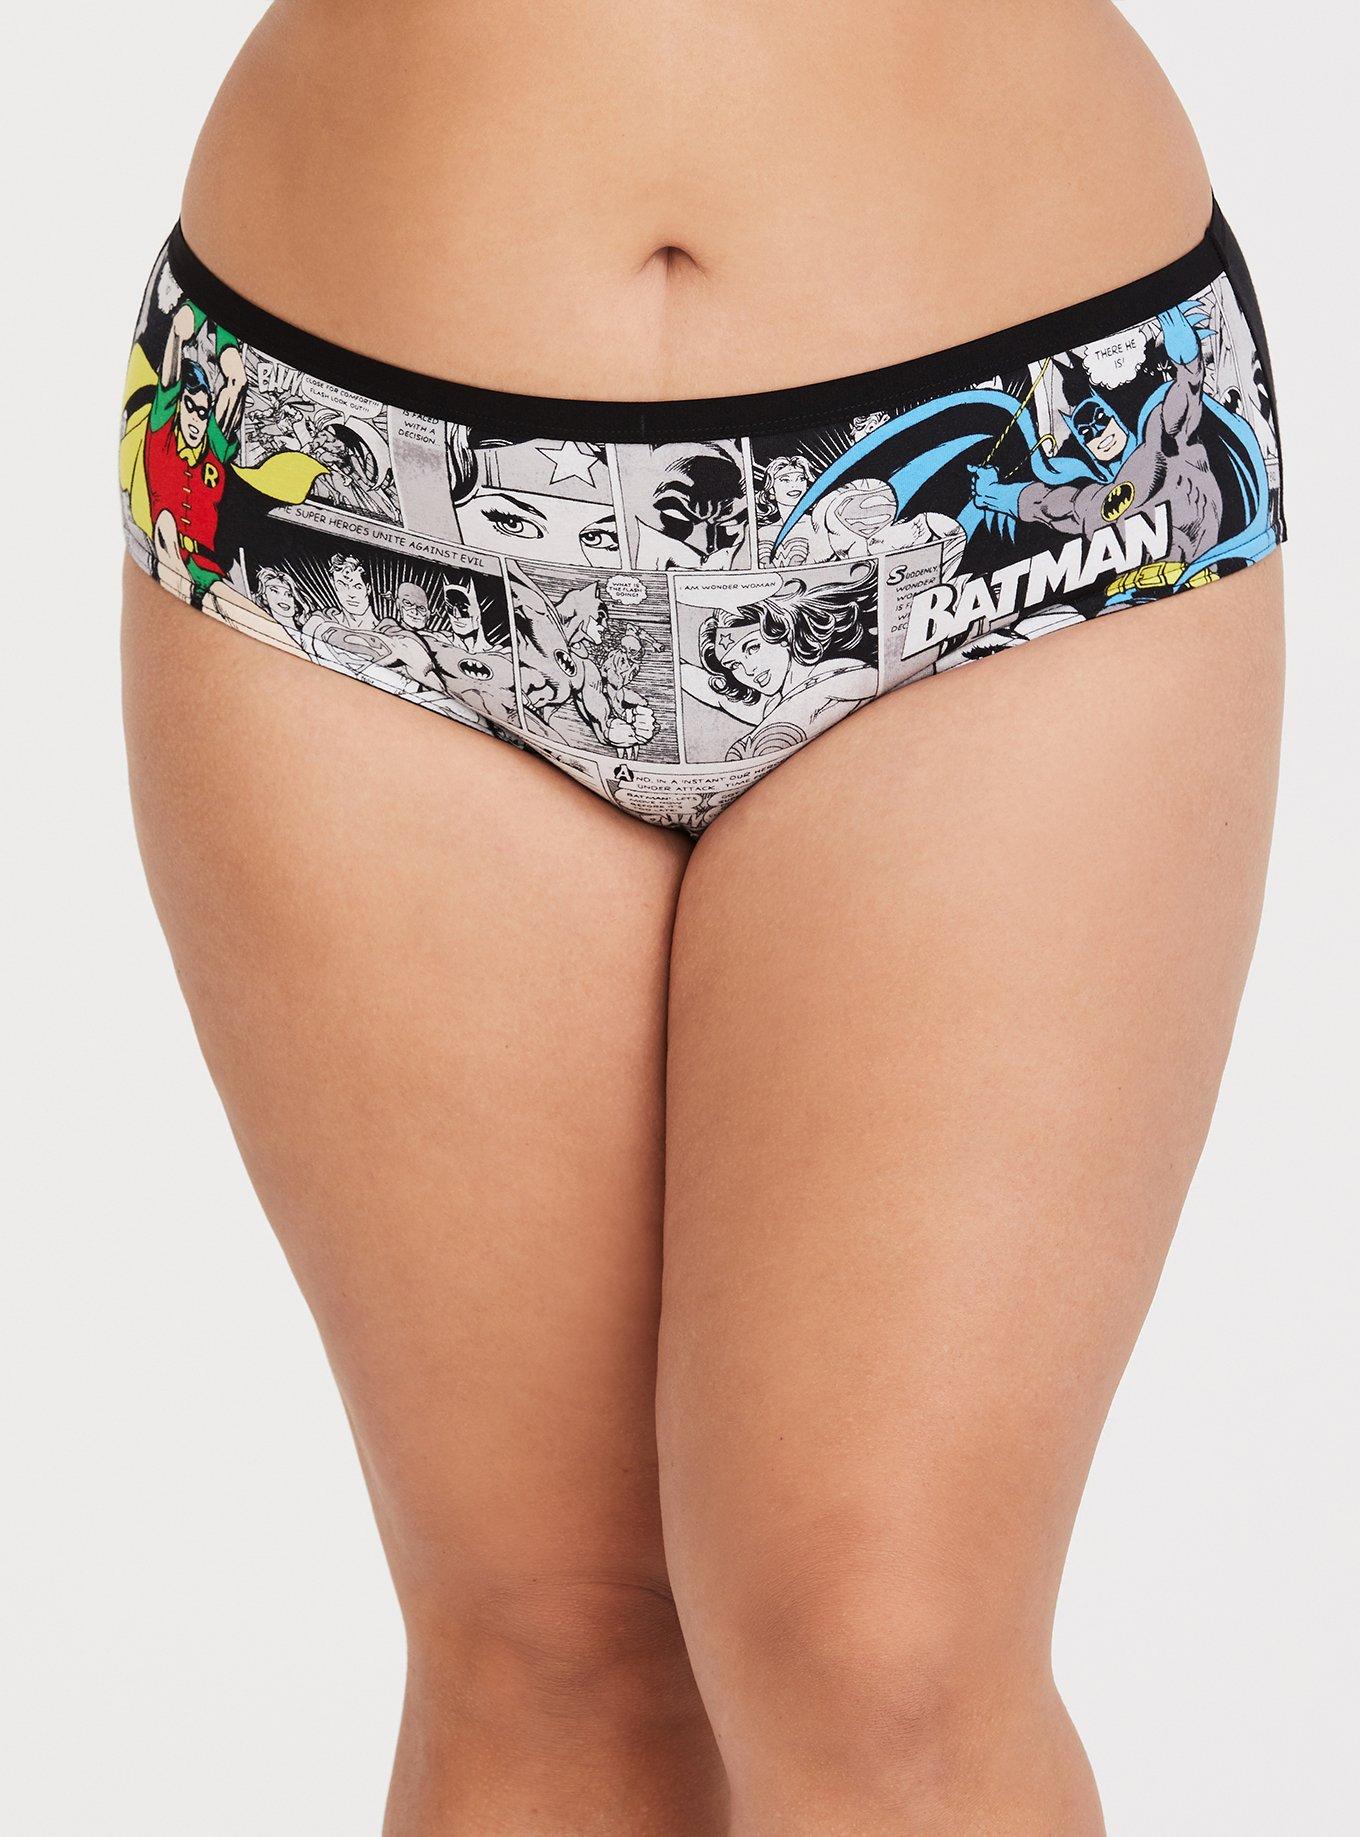 batman thong products for sale